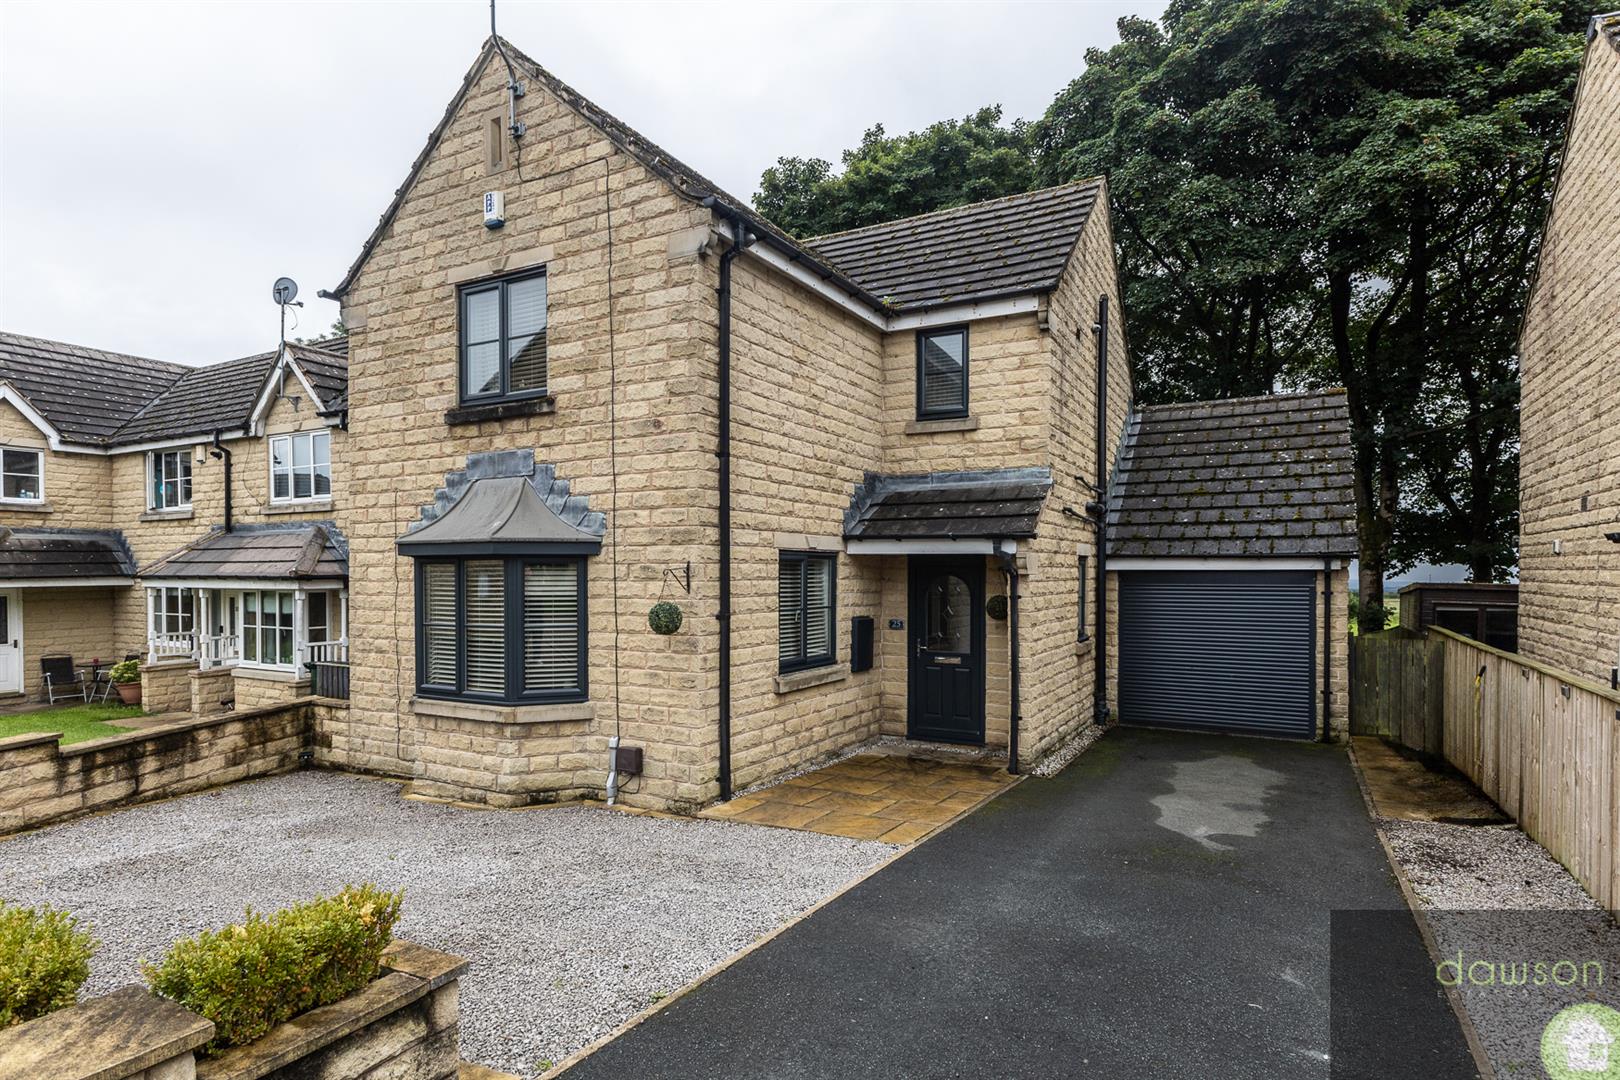 3 bed detached house for sale in Pintail Avenue, Bradford, BD6 